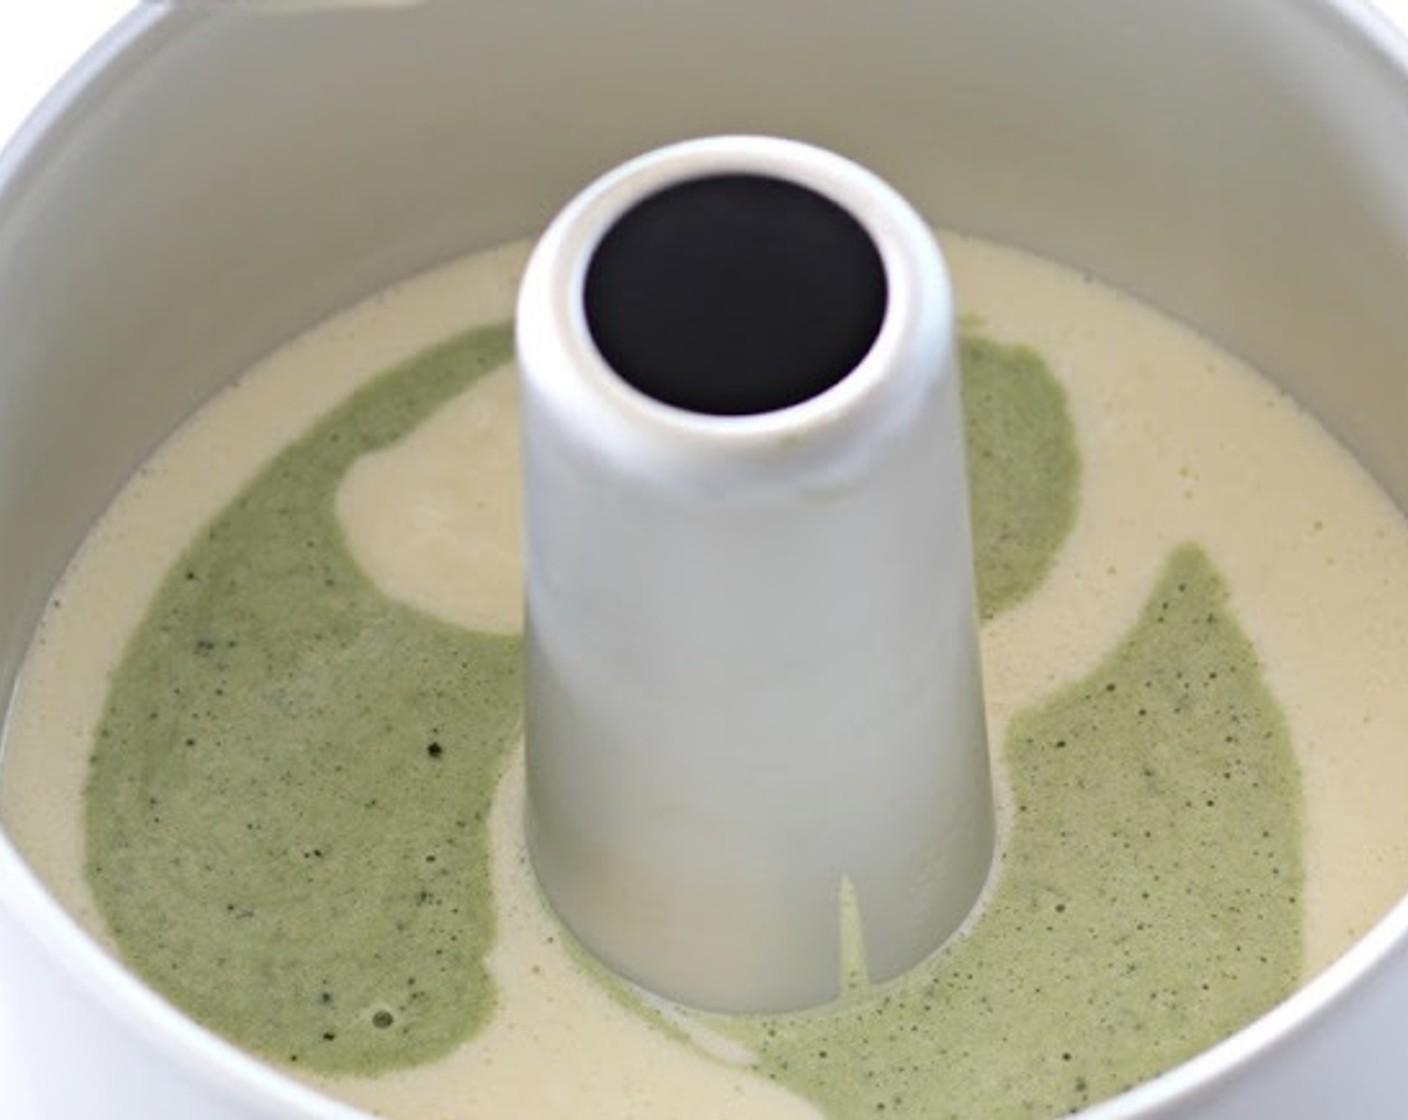 step 7 In another bowl make matcha paste: mix Matcha Powder (1/2 Tbsp) and Water (2 Tbsp). Add matcha paste into one portion of the batter, gently fold well with a rubber spatula.